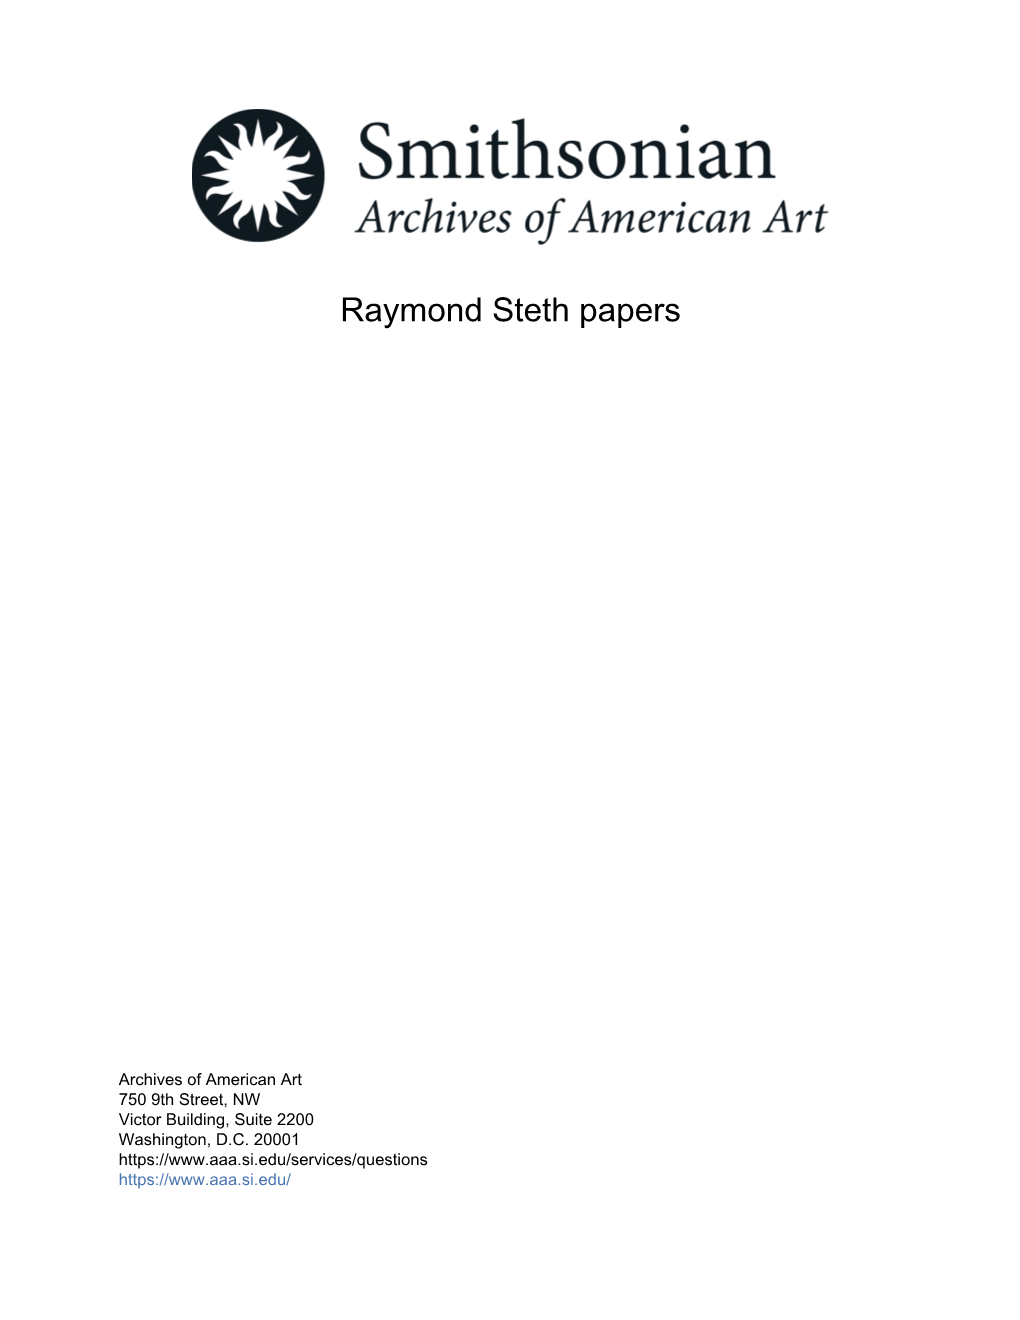 Raymond Steth Papers